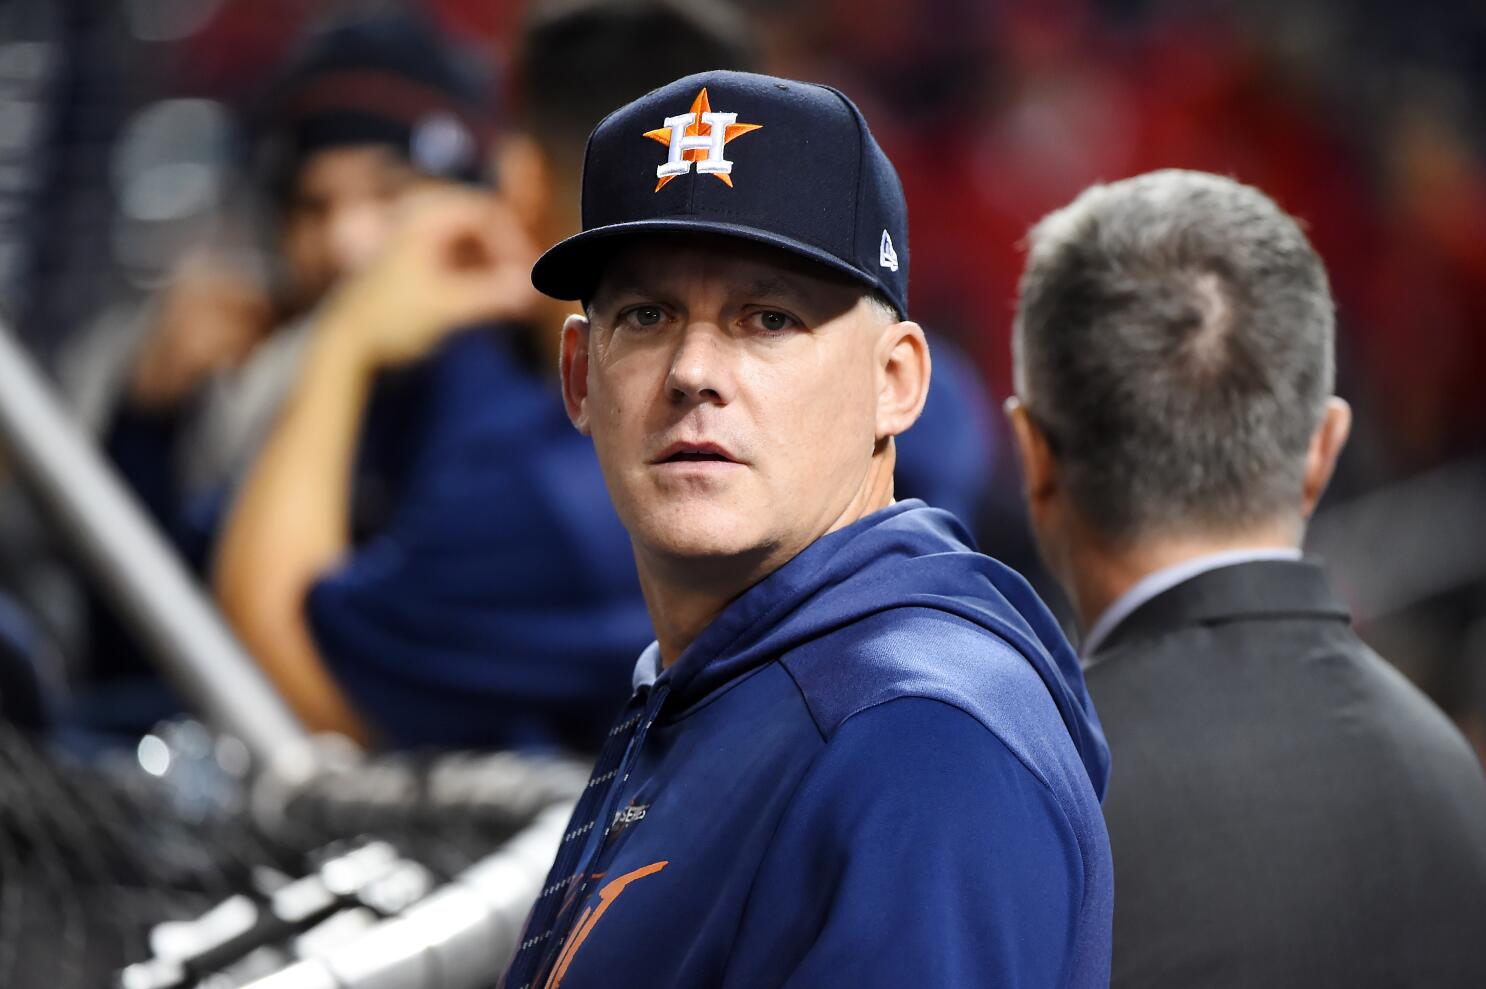 MLB reportedly investigates Astros after claims that players wore